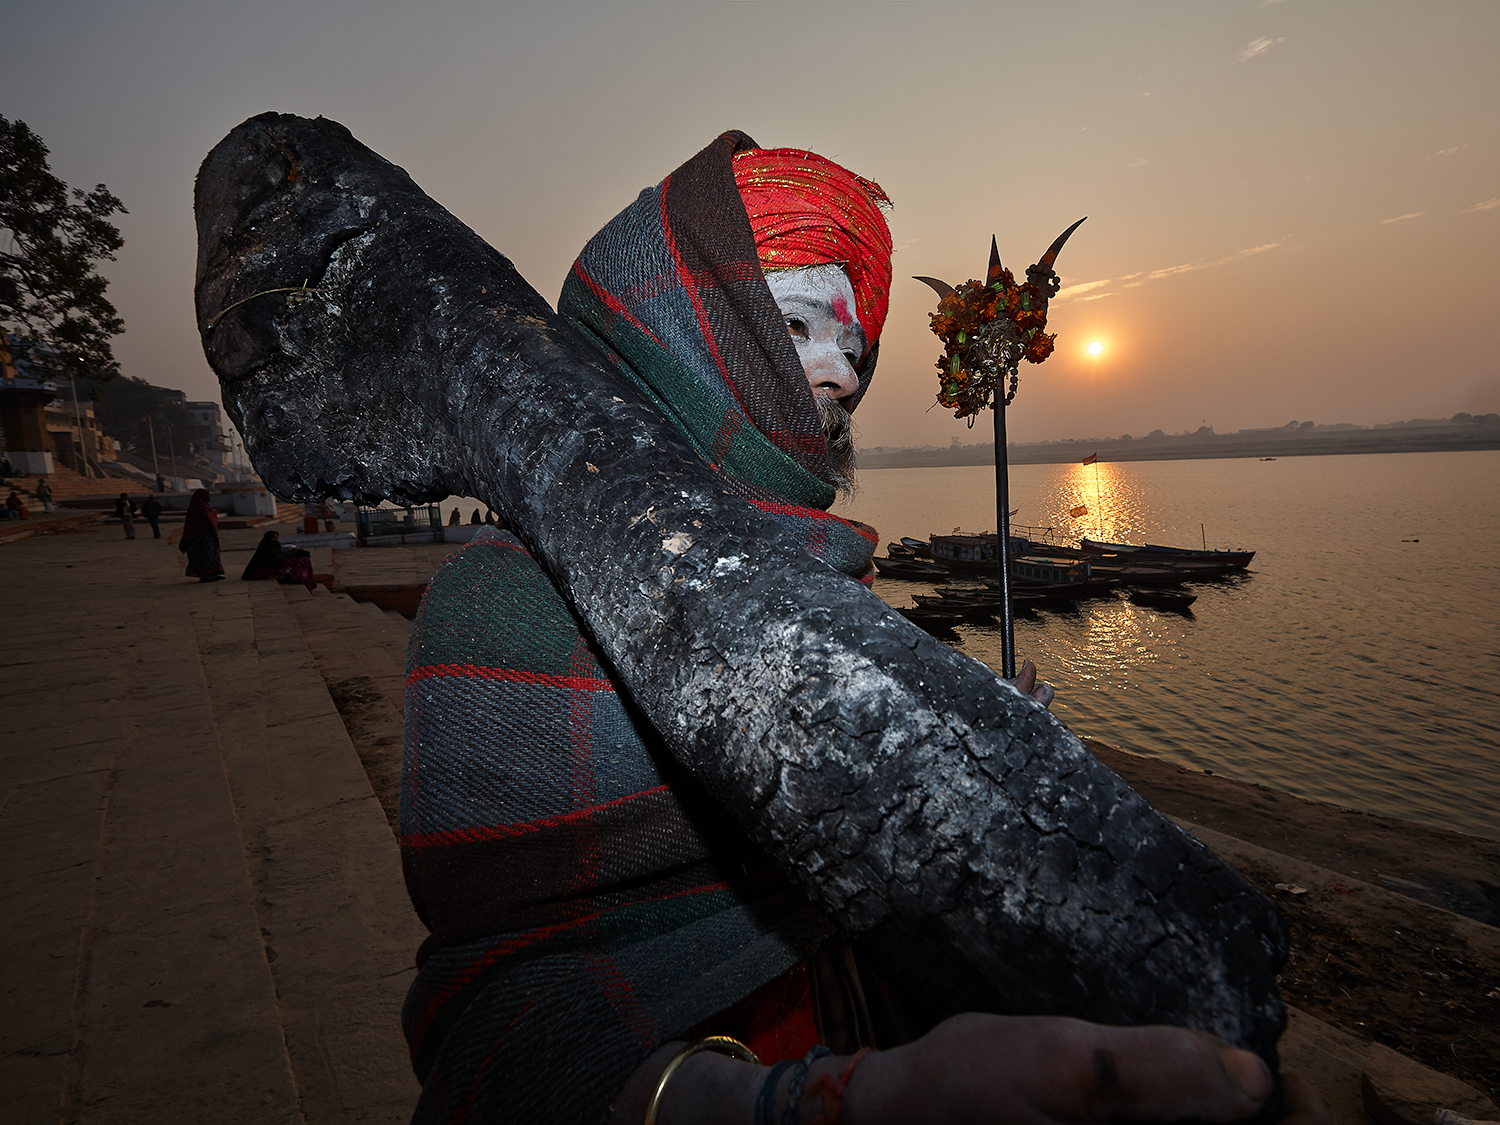 A Sadhu carrying back a log from the burning ghats that he will use for warmth during the winter months.